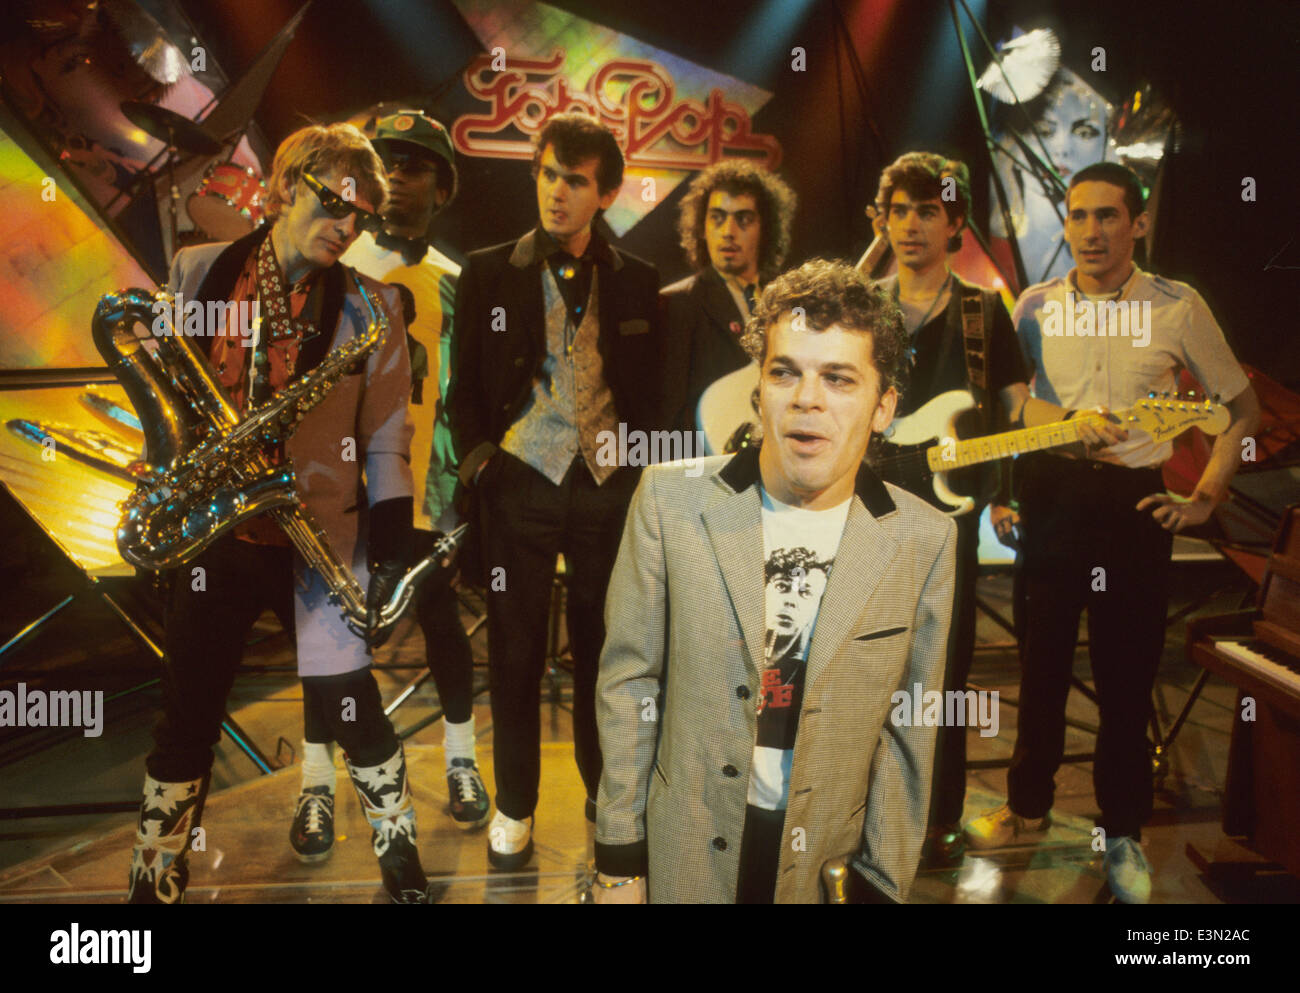 IAN DURY AND THE BLOCKHEADS UK rock group about 1980. Stock Photo